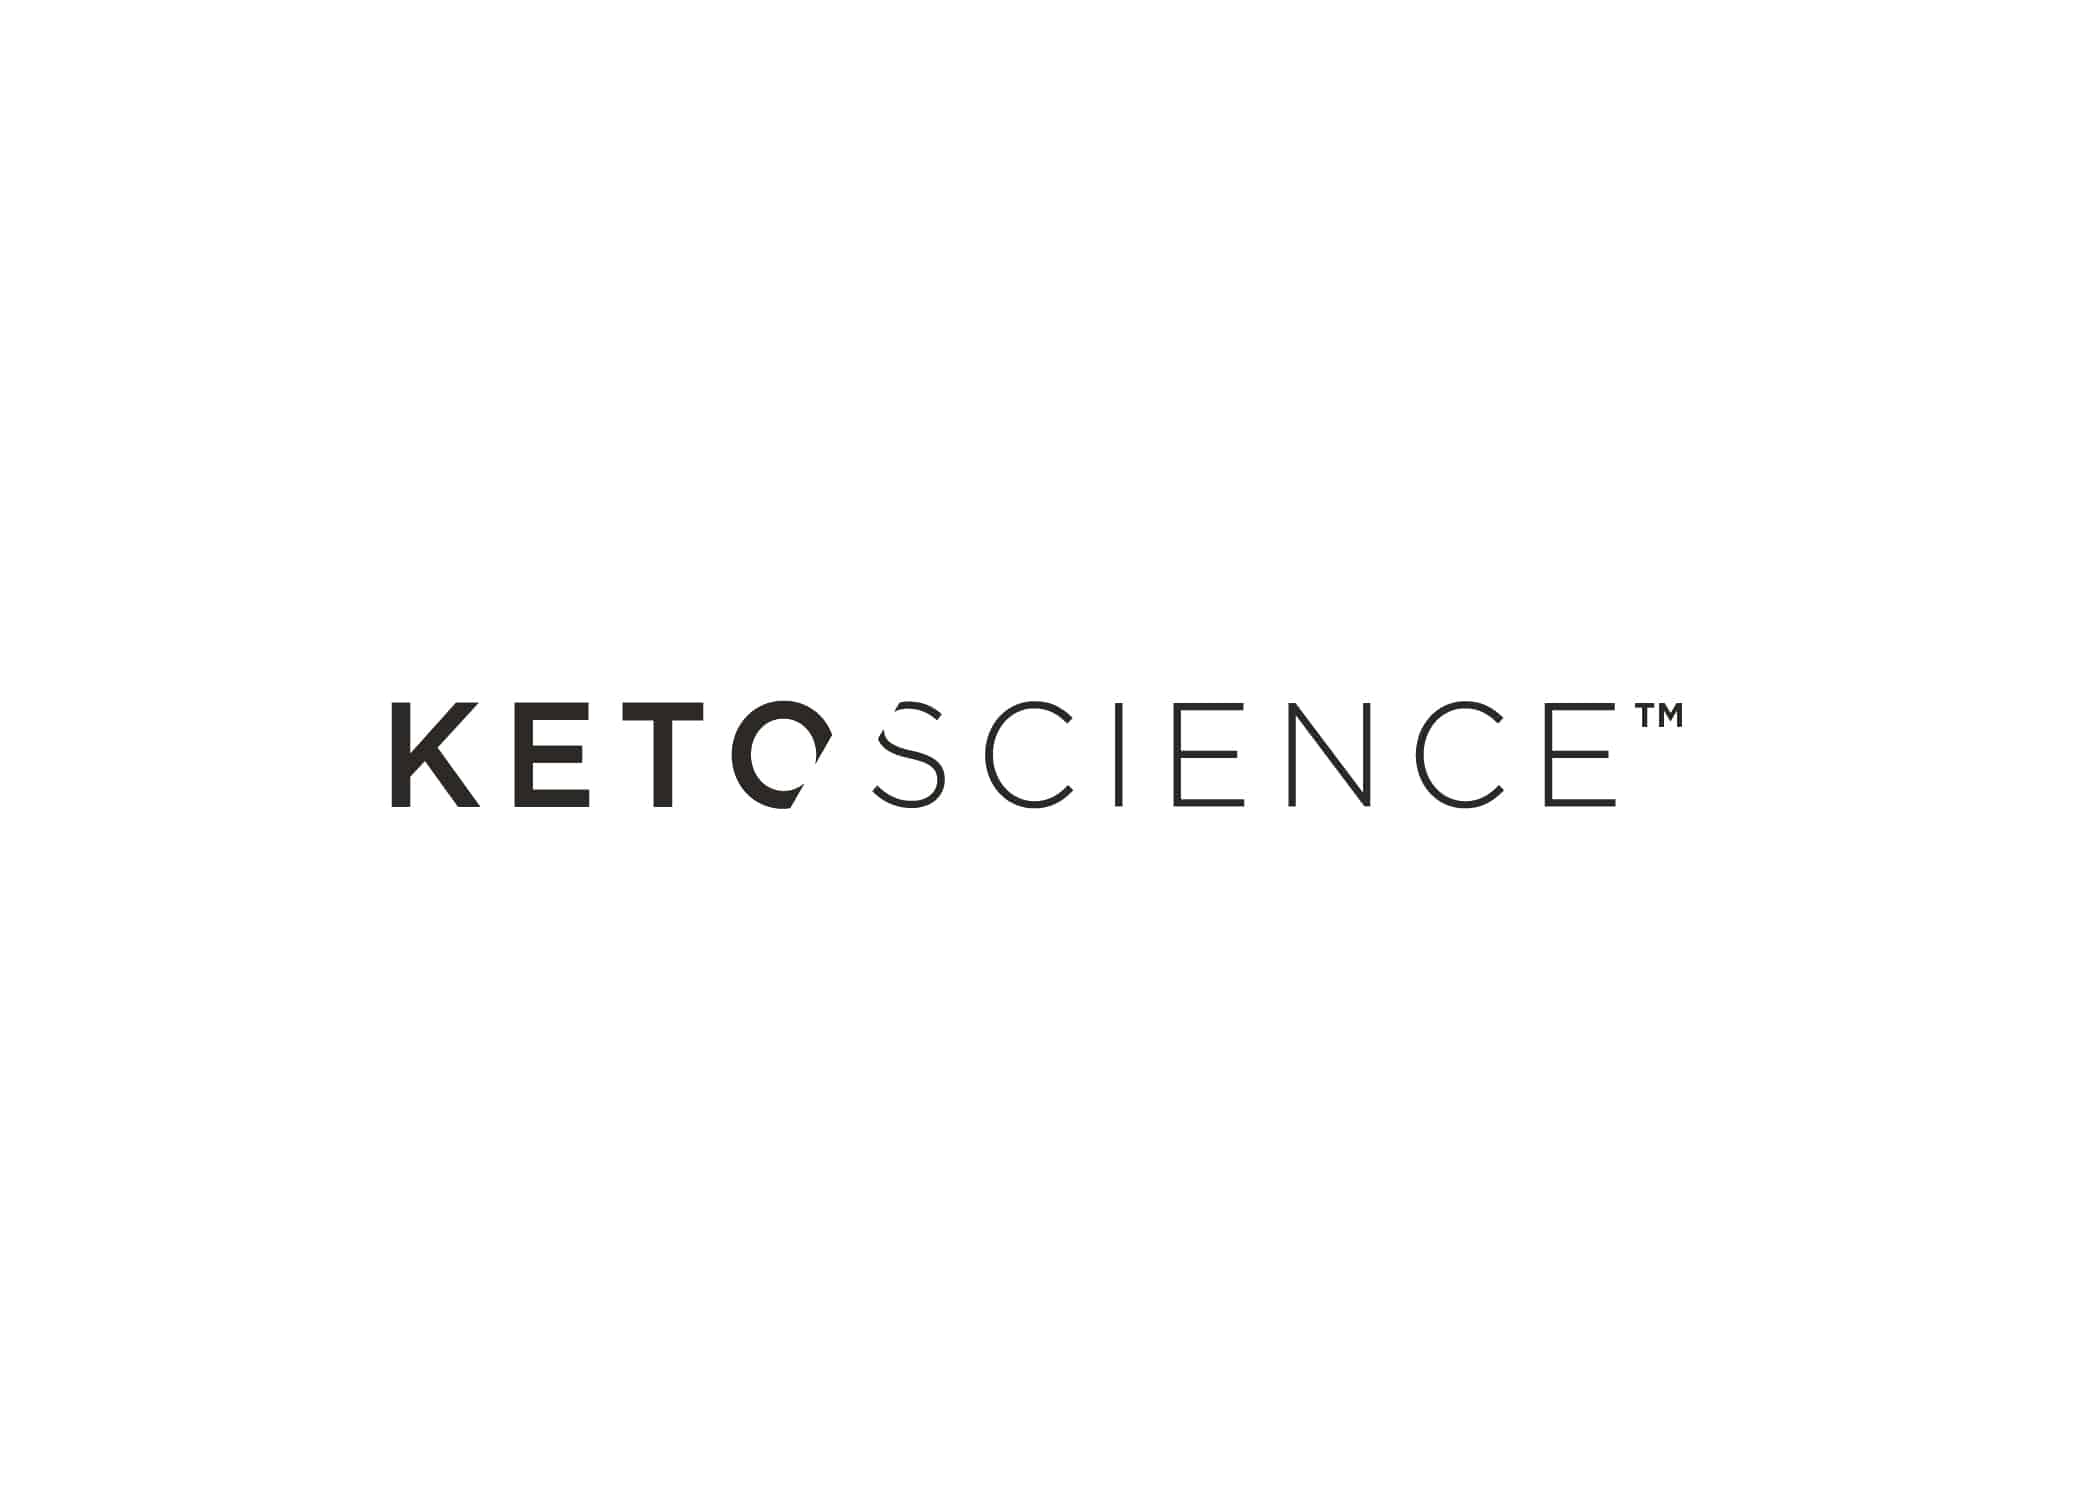 Keto Science logo design with a band slicing the “O” and “S,” bold font for “keto,” and simple font for “science.”